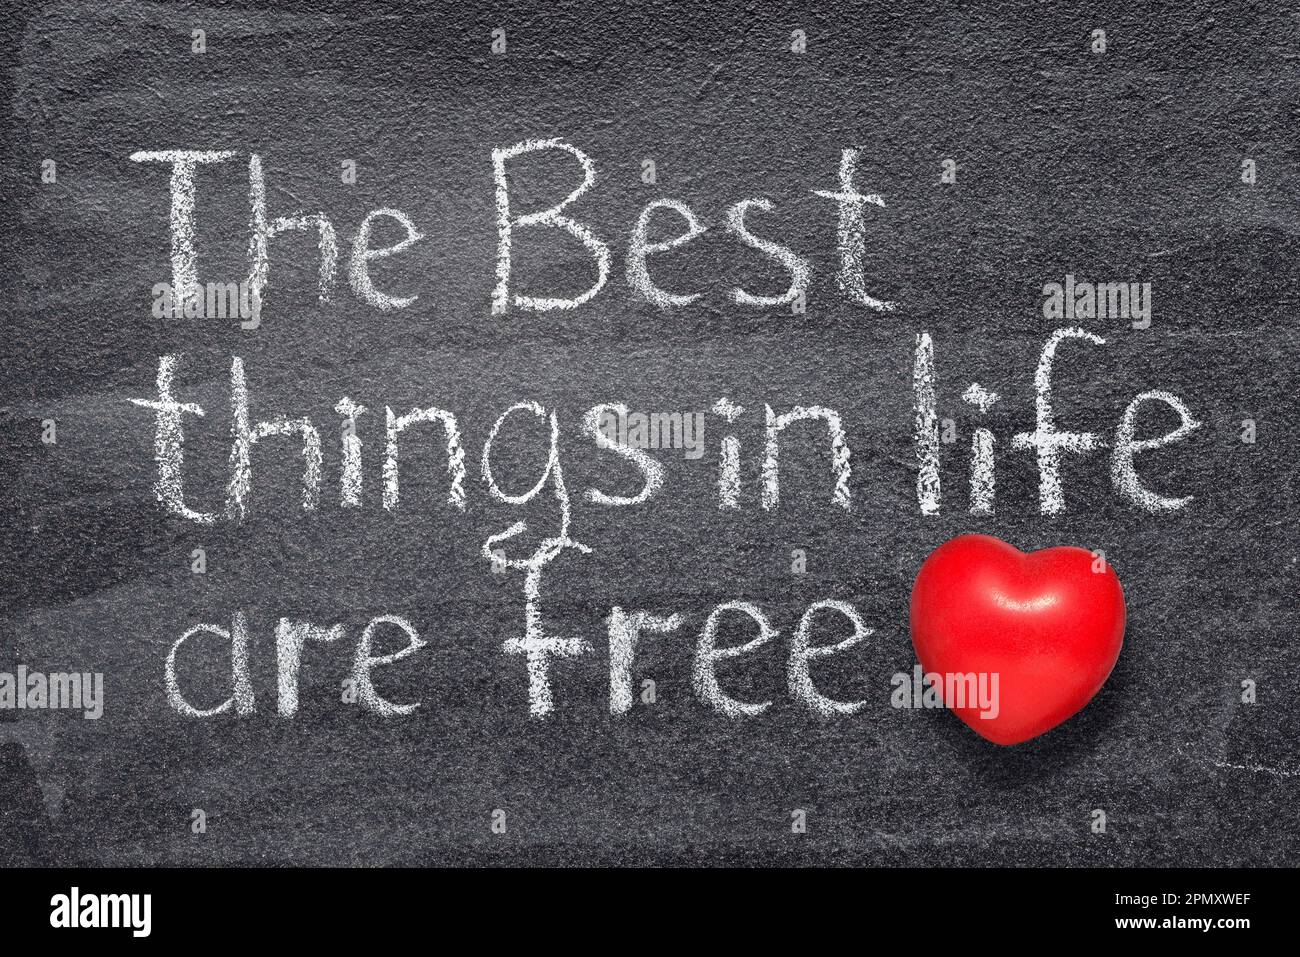 the Best things in life are free proverb written on chalkboard with red heart symbol Stock Photo